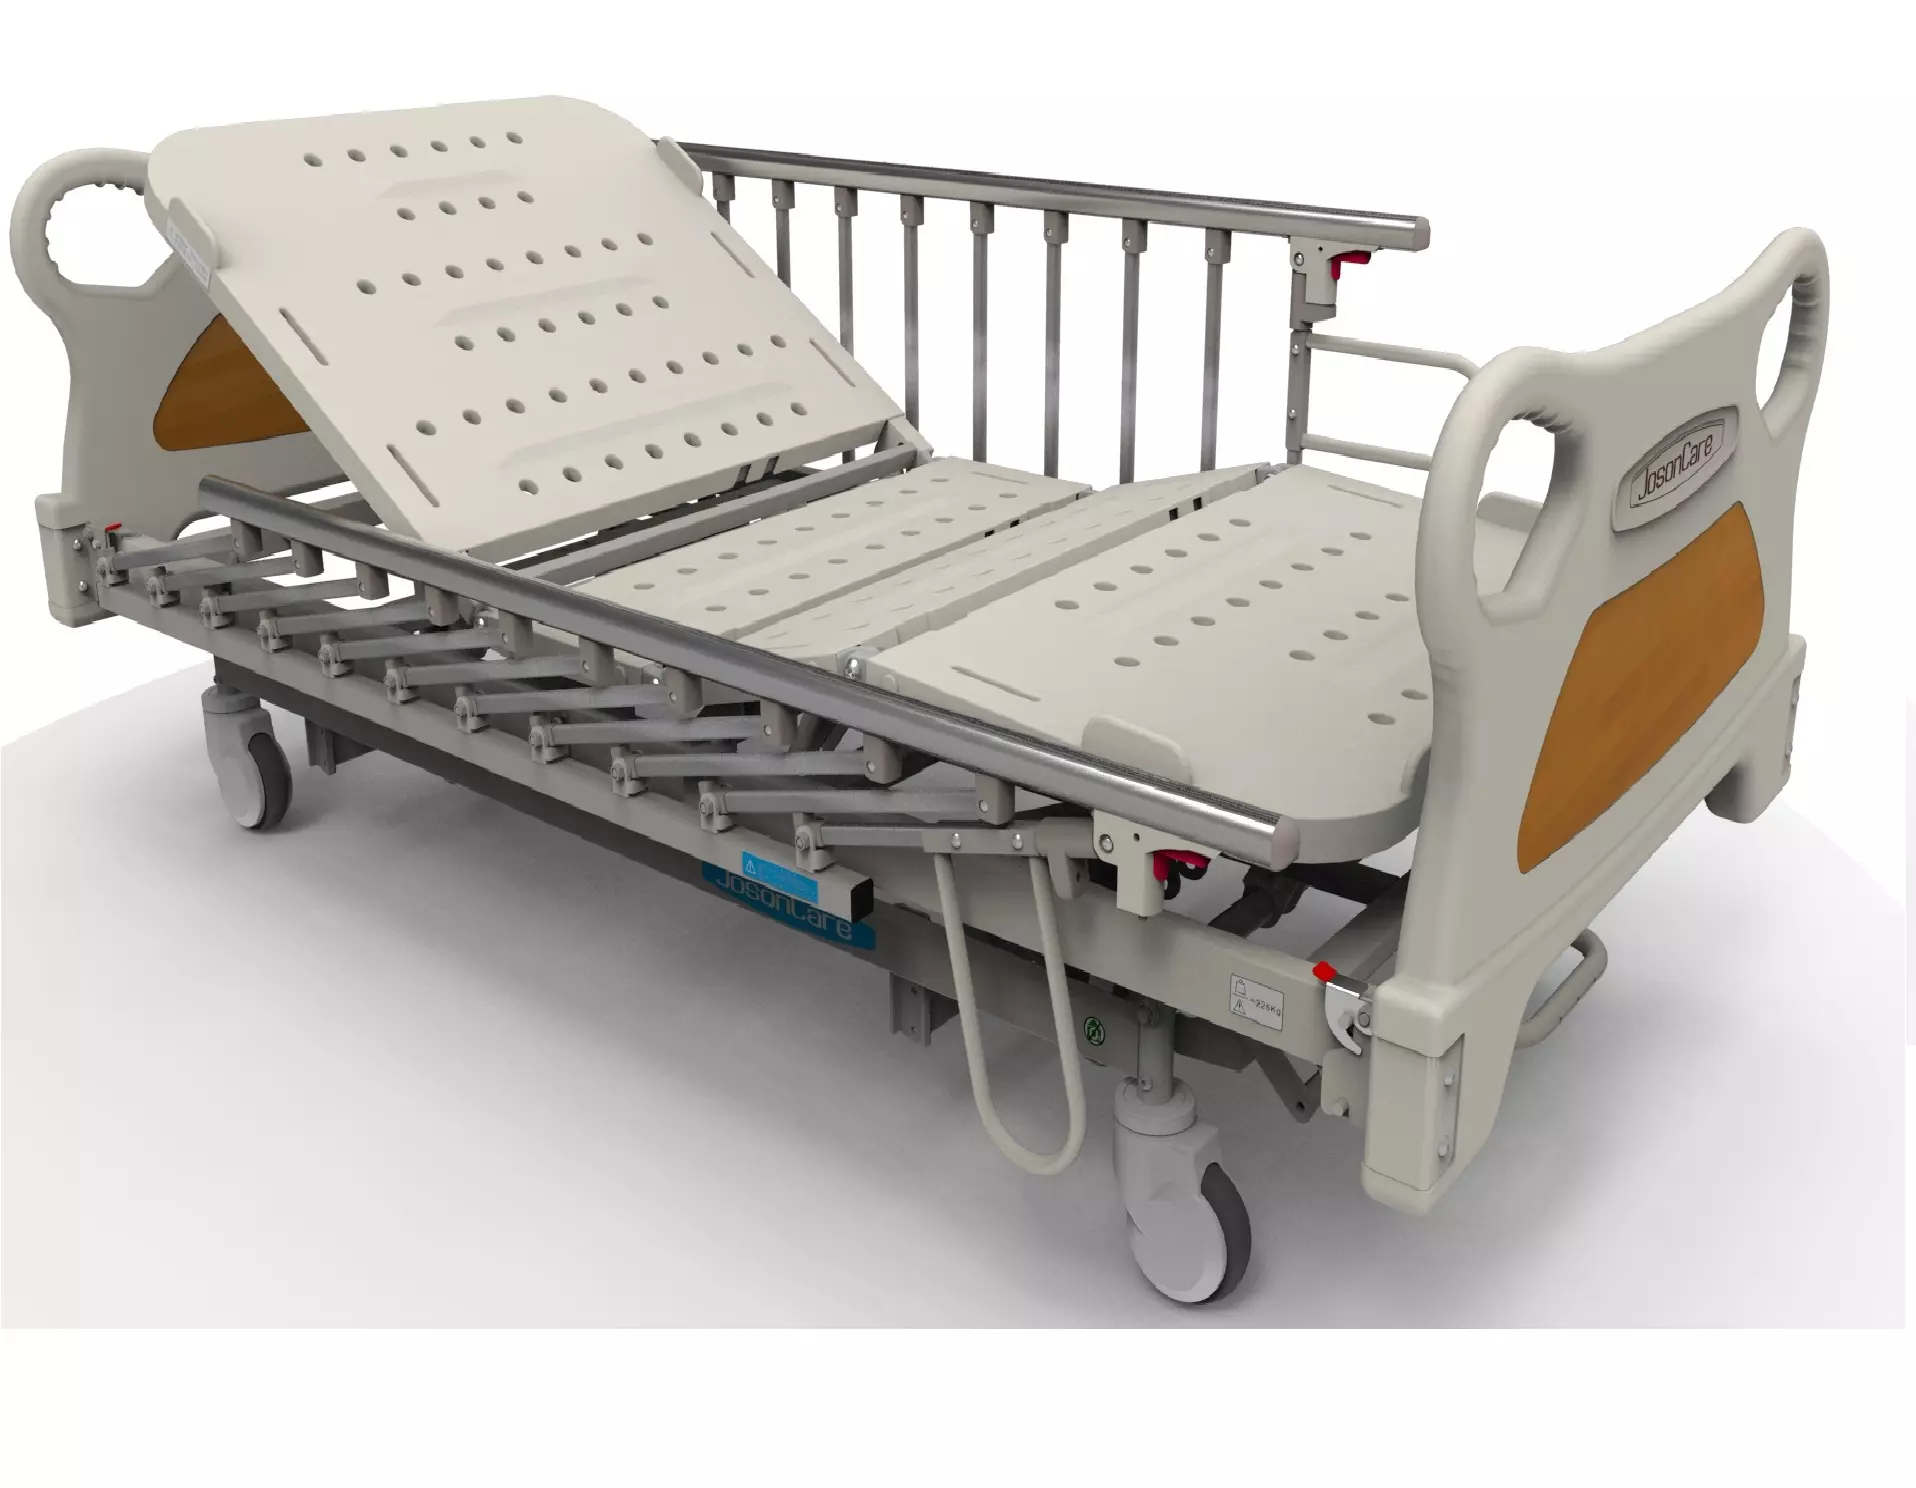 What Are The Top 3 Reasons To Get Medical Bed Side Rails?